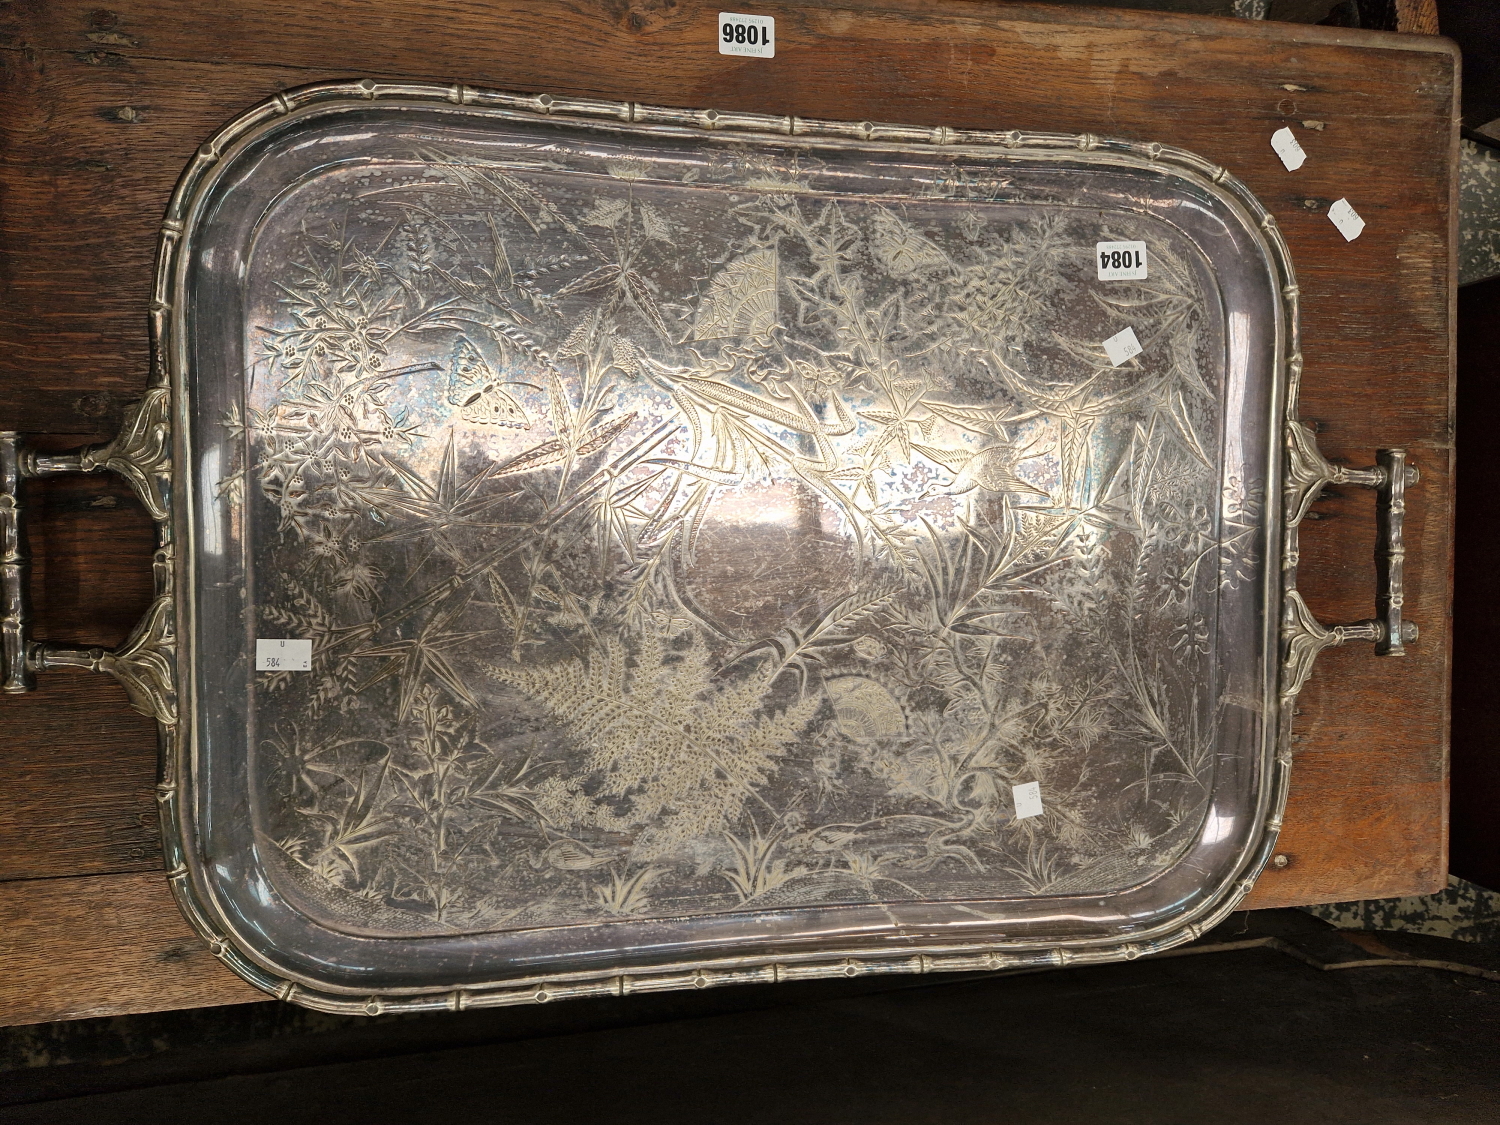 A LARGE SILVER PLATED TRAY IN THE AESTHETIC TASTE.